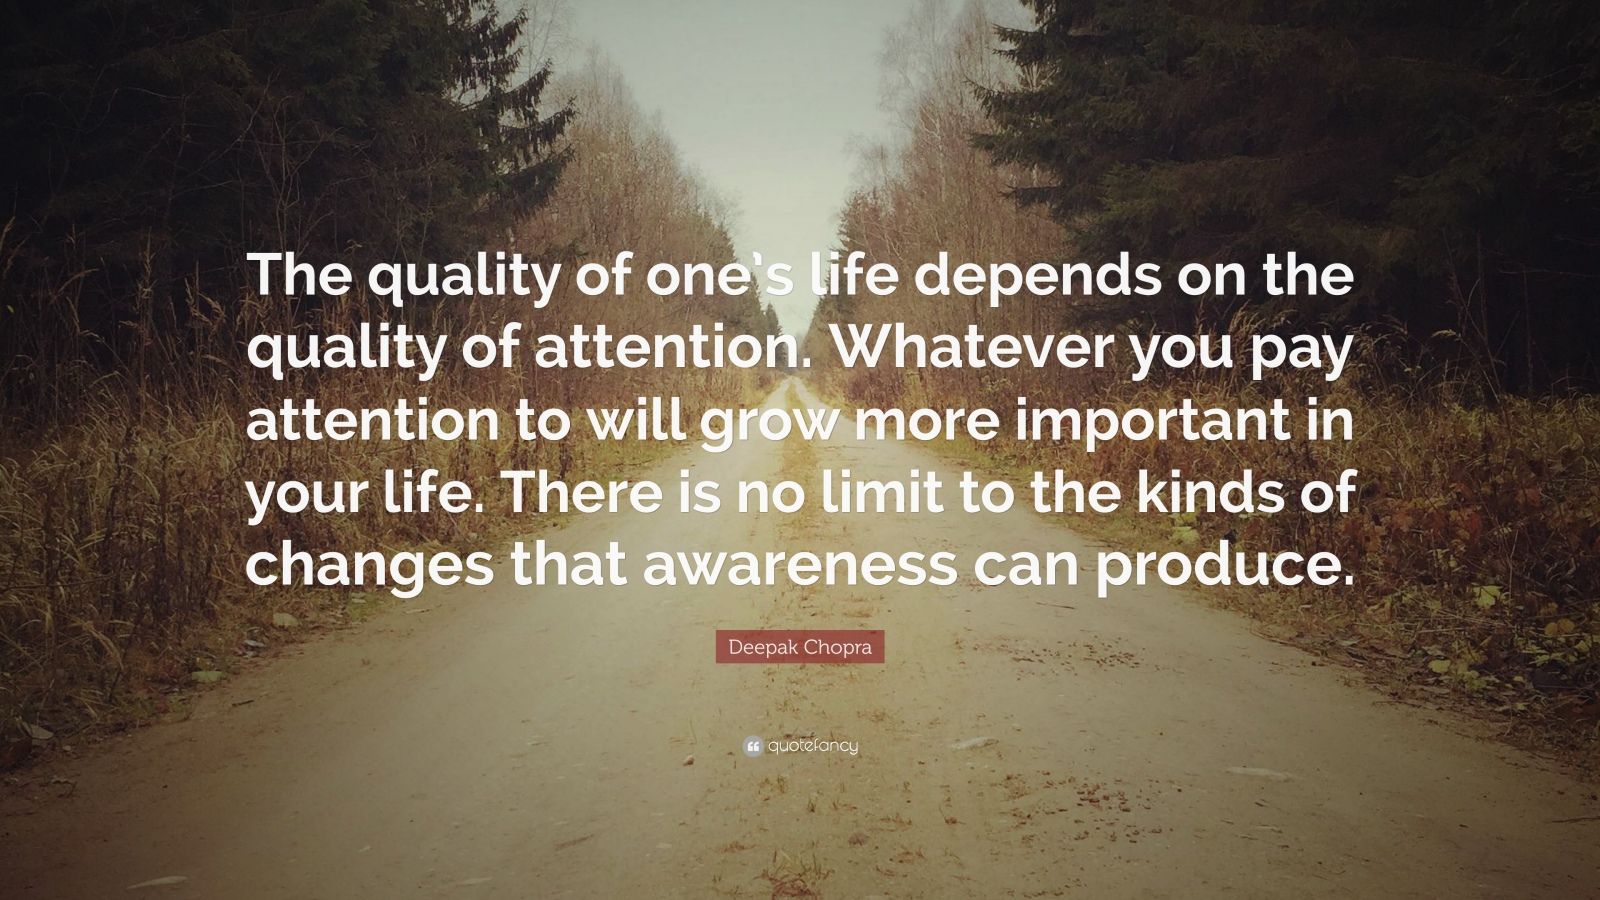 Deepak Chopra Quote: “The quality of one’s life depends on the quality